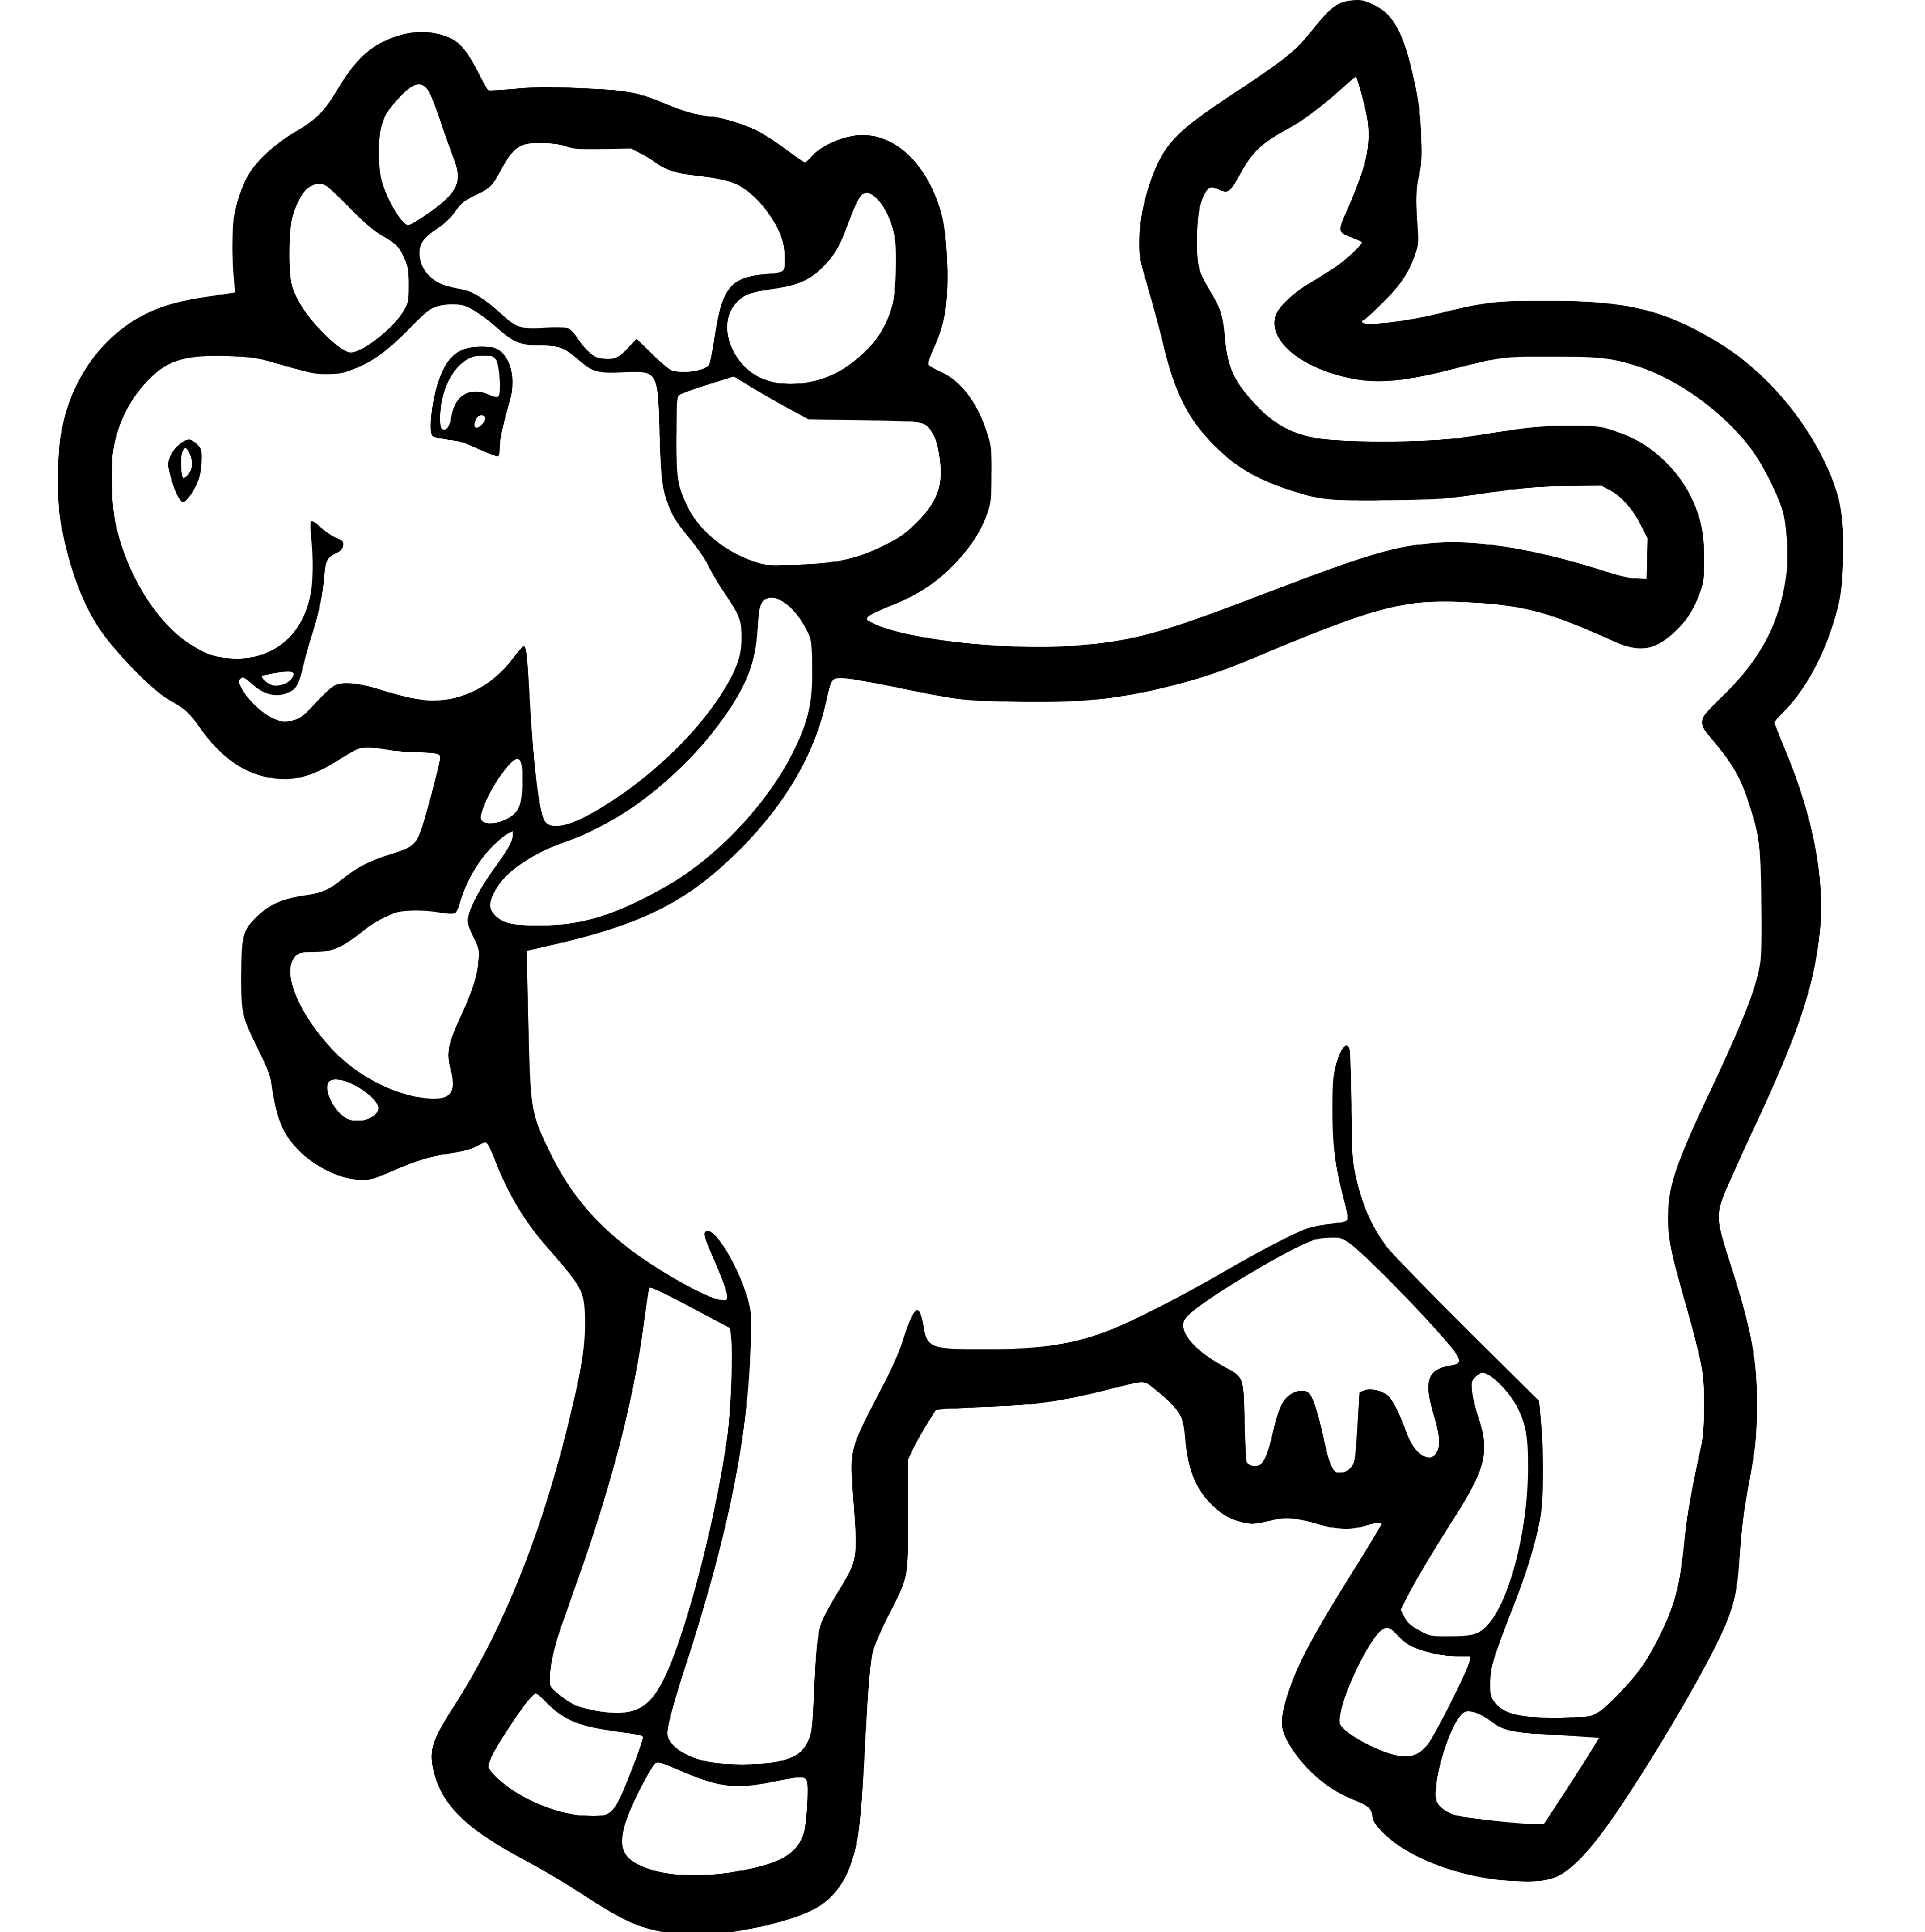 Printable Cartoon Cow Coloring Page for kids.